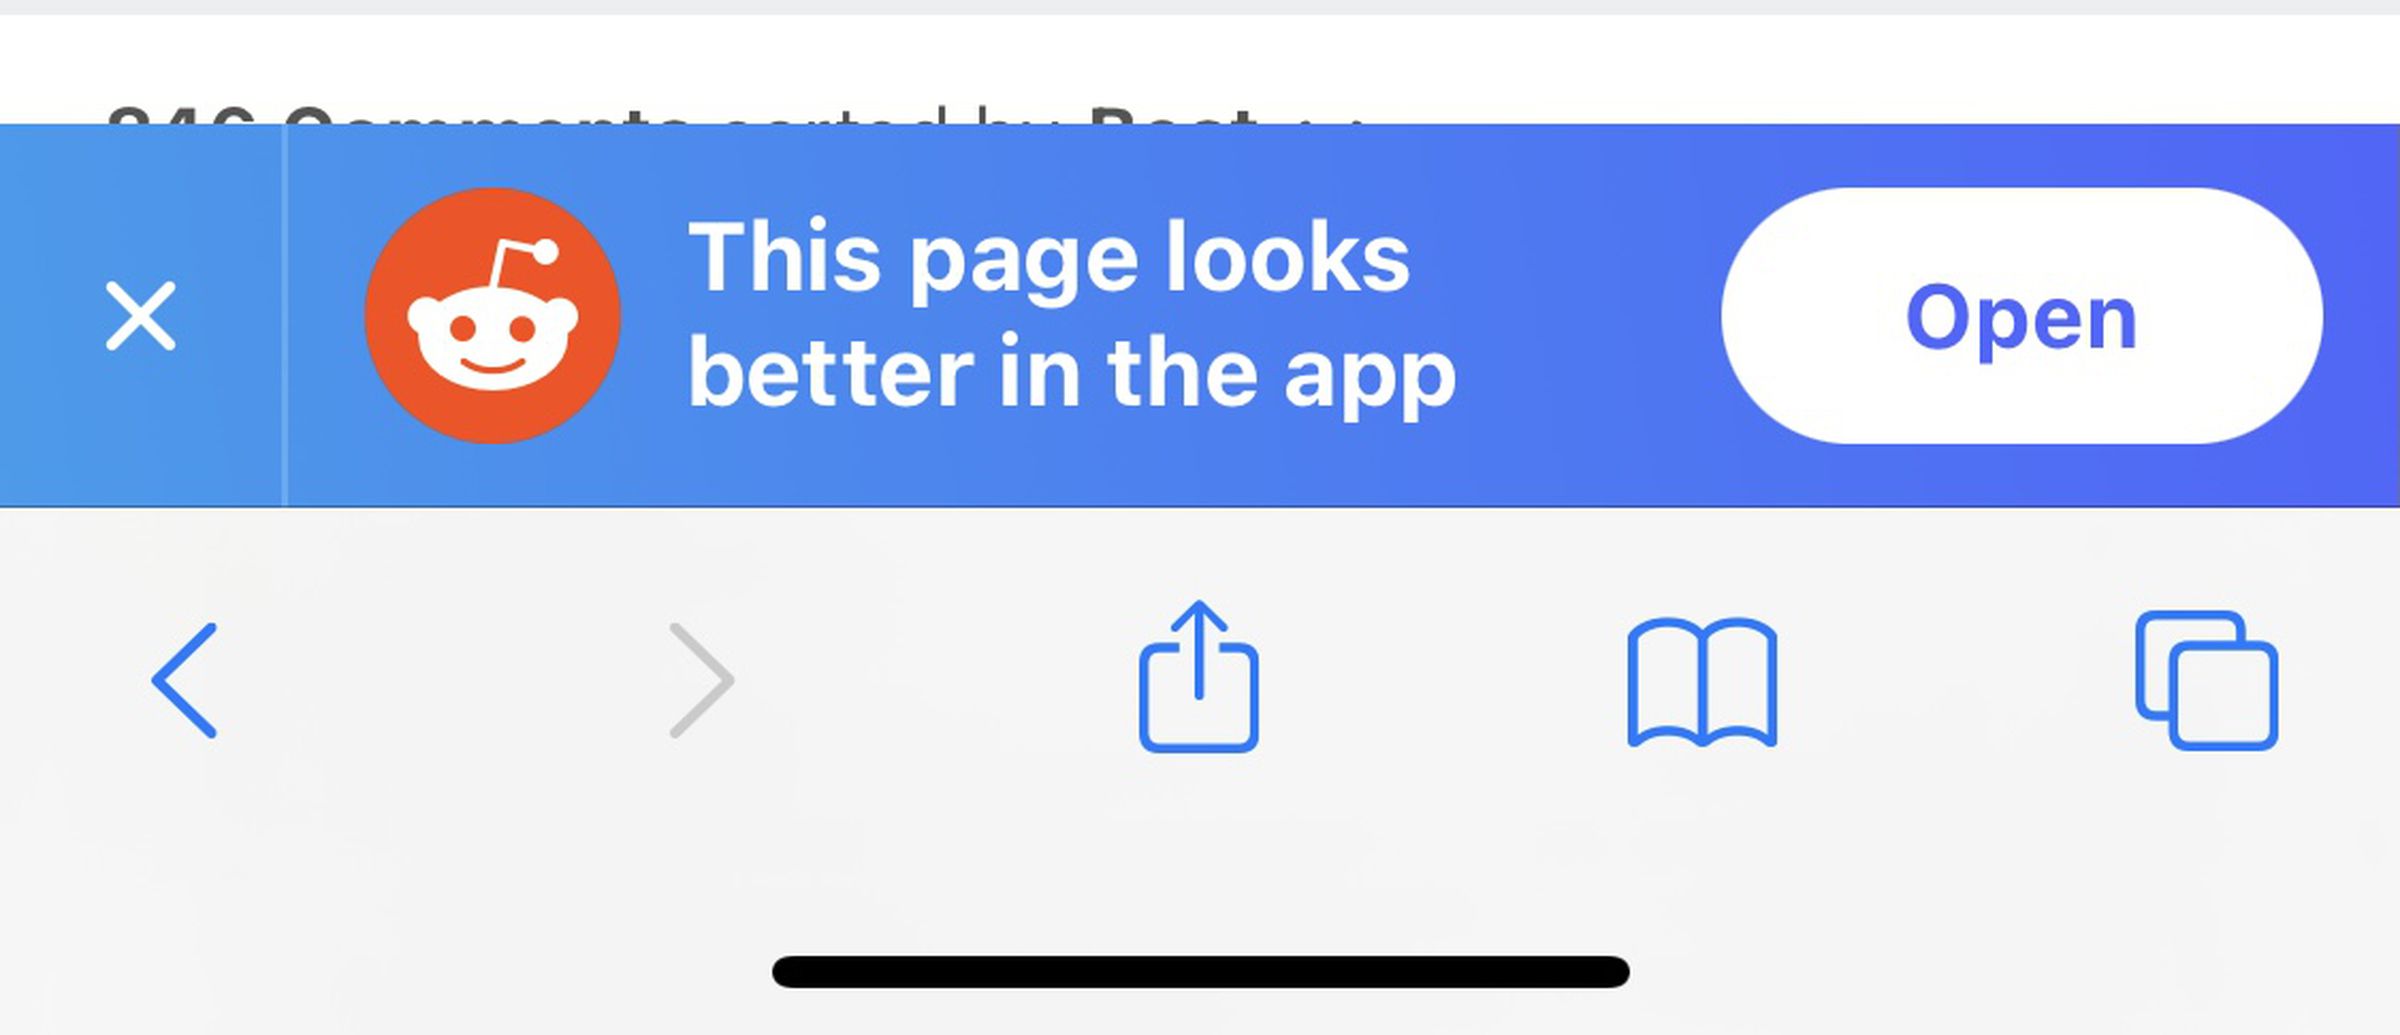 No, I don’t want to view the page in the app, thanks.